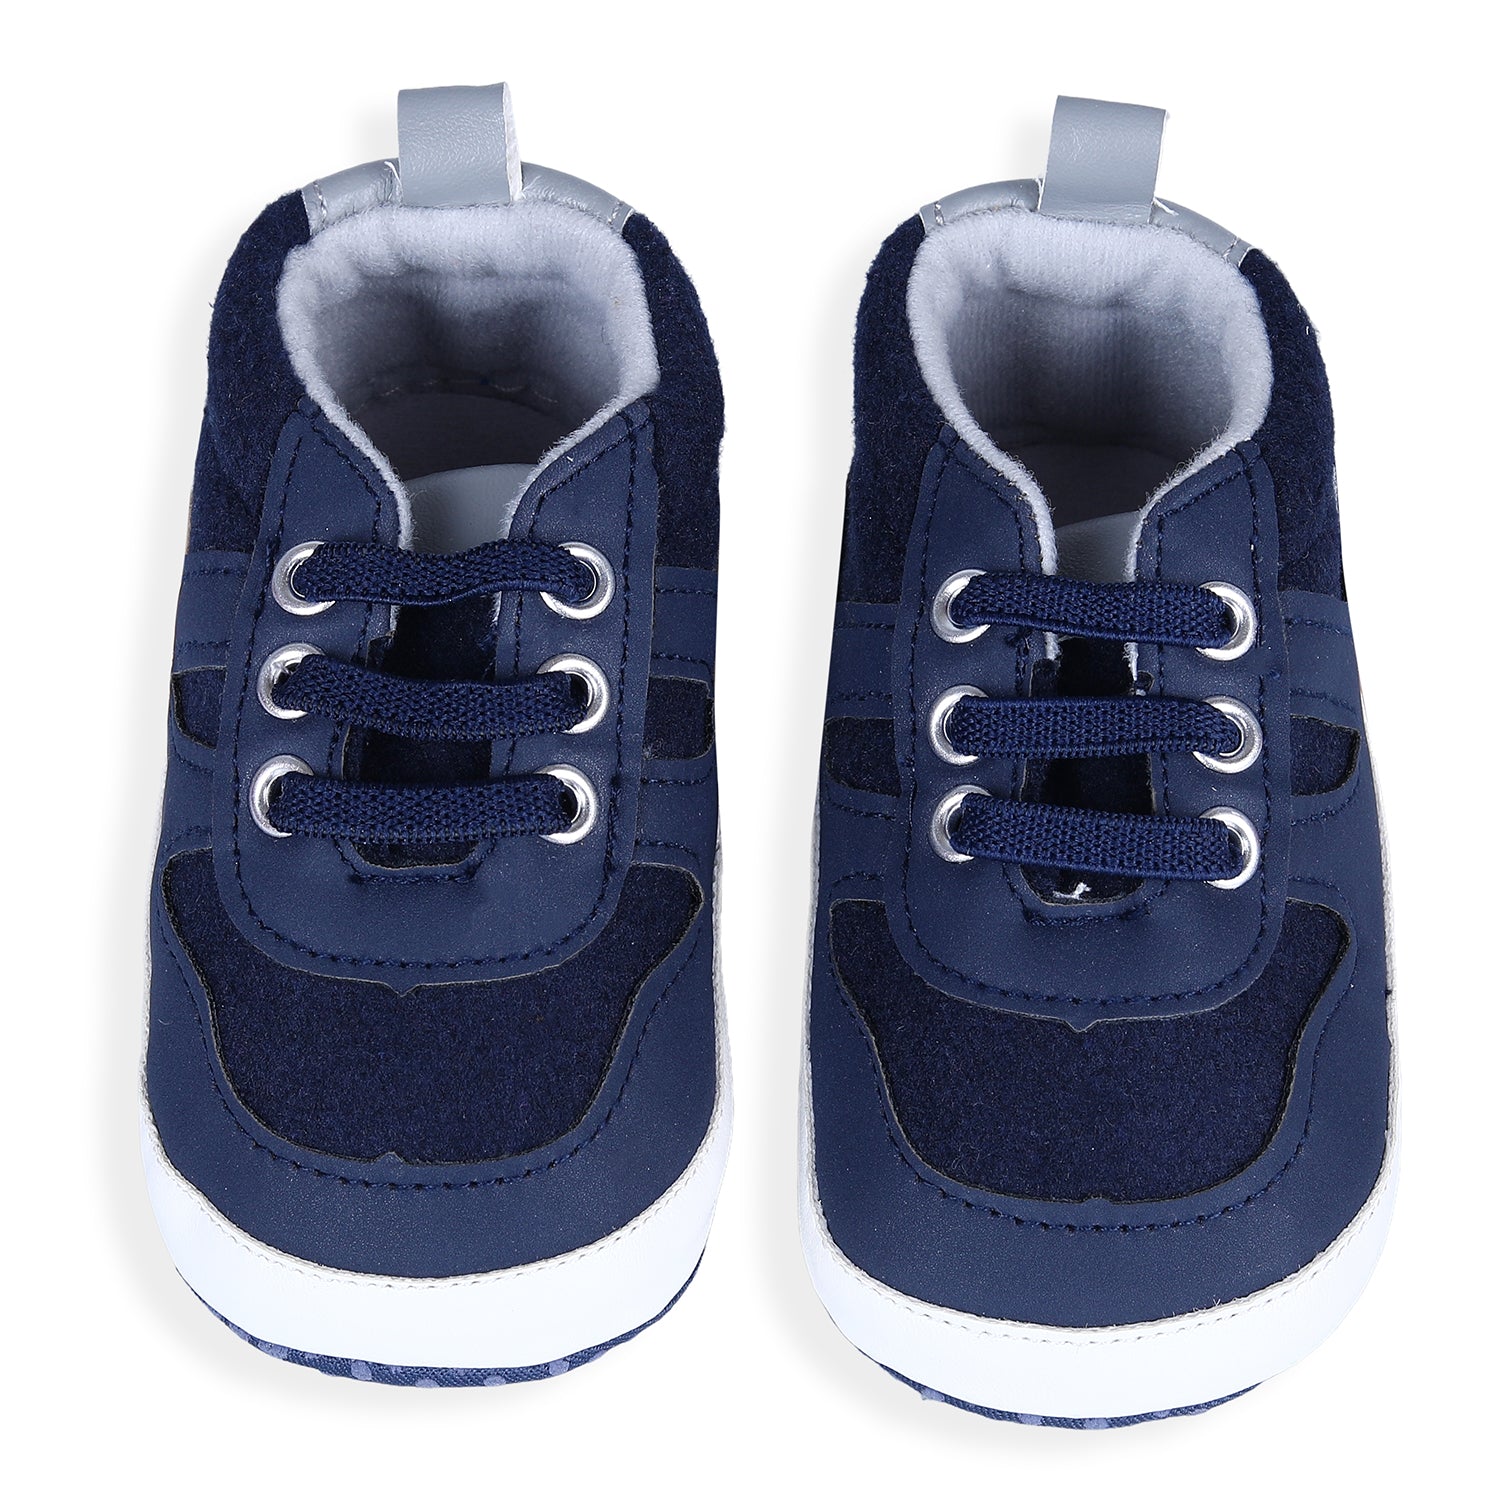 Lace-up Colour-blocked Comfortable Anti-Slip Sneaker Booties - Blue - Baby Moo